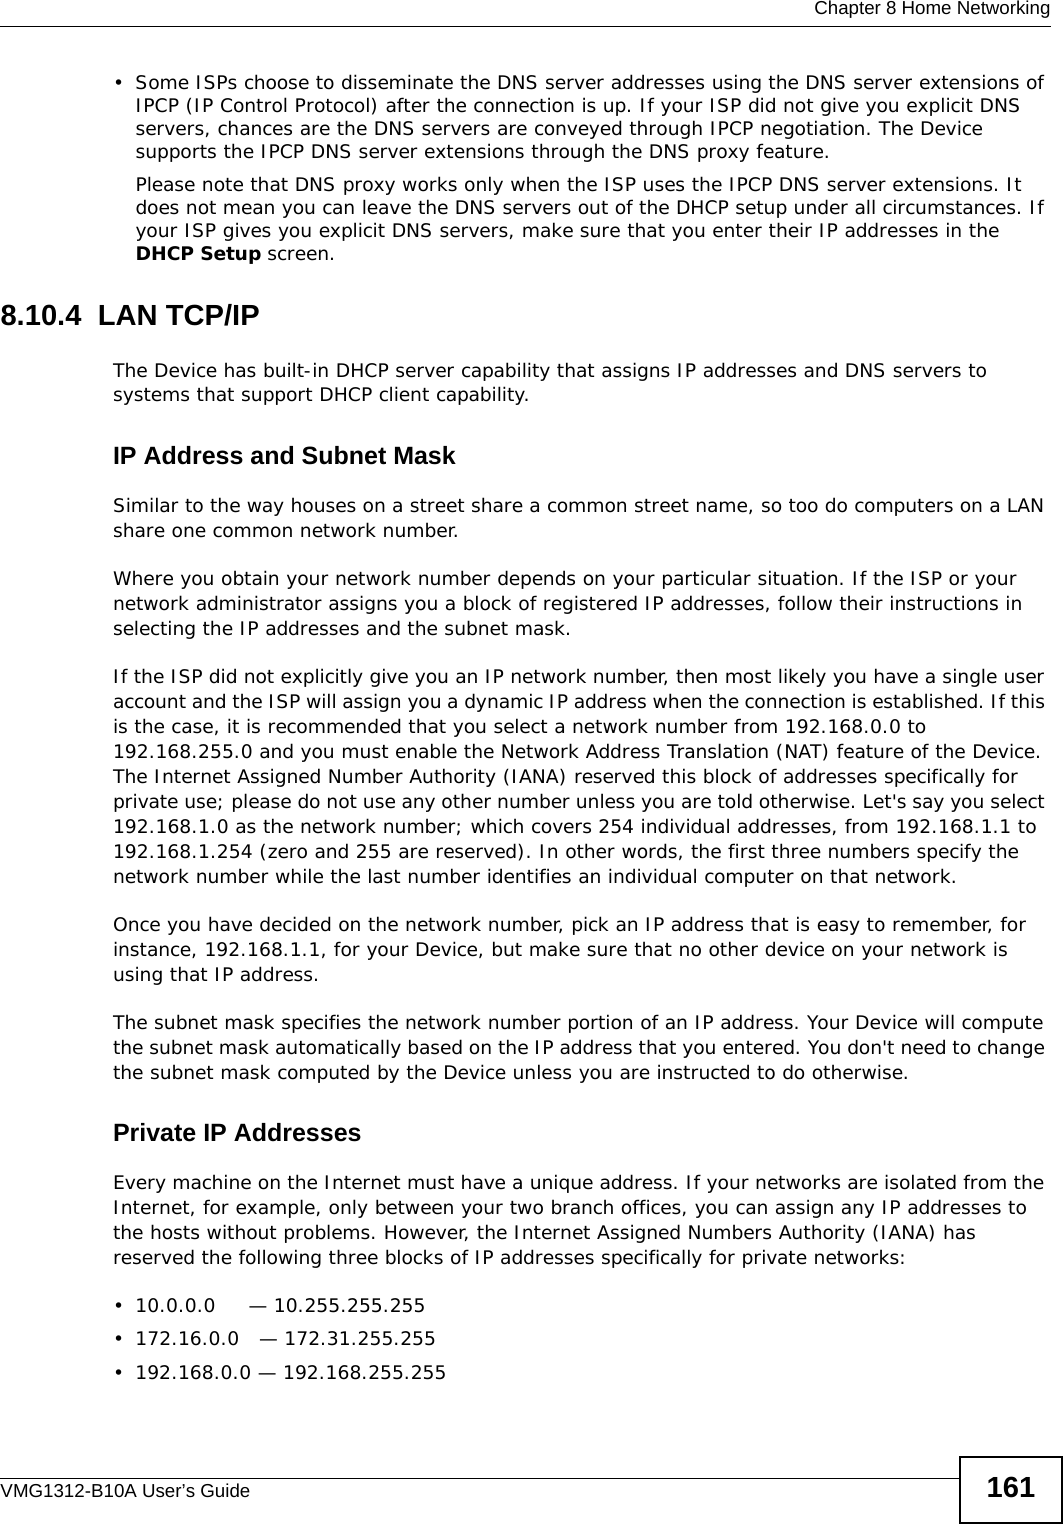  Chapter 8 Home NetworkingVMG1312-B10A User’s Guide 161• Some ISPs choose to disseminate the DNS server addresses using the DNS server extensions of IPCP (IP Control Protocol) after the connection is up. If your ISP did not give you explicit DNS servers, chances are the DNS servers are conveyed through IPCP negotiation. The Device supports the IPCP DNS server extensions through the DNS proxy feature.Please note that DNS proxy works only when the ISP uses the IPCP DNS server extensions. It does not mean you can leave the DNS servers out of the DHCP setup under all circumstances. If your ISP gives you explicit DNS servers, make sure that you enter their IP addresses in the DHCP Setup screen.8.10.4  LAN TCP/IP The Device has built-in DHCP server capability that assigns IP addresses and DNS servers to systems that support DHCP client capability.IP Address and Subnet MaskSimilar to the way houses on a street share a common street name, so too do computers on a LAN share one common network number.Where you obtain your network number depends on your particular situation. If the ISP or your network administrator assigns you a block of registered IP addresses, follow their instructions in selecting the IP addresses and the subnet mask.If the ISP did not explicitly give you an IP network number, then most likely you have a single user account and the ISP will assign you a dynamic IP address when the connection is established. If this is the case, it is recommended that you select a network number from 192.168.0.0 to 192.168.255.0 and you must enable the Network Address Translation (NAT) feature of the Device. The Internet Assigned Number Authority (IANA) reserved this block of addresses specifically for private use; please do not use any other number unless you are told otherwise. Let&apos;s say you select 192.168.1.0 as the network number; which covers 254 individual addresses, from 192.168.1.1 to 192.168.1.254 (zero and 255 are reserved). In other words, the first three numbers specify the network number while the last number identifies an individual computer on that network.Once you have decided on the network number, pick an IP address that is easy to remember, for instance, 192.168.1.1, for your Device, but make sure that no other device on your network is using that IP address.The subnet mask specifies the network number portion of an IP address. Your Device will compute the subnet mask automatically based on the IP address that you entered. You don&apos;t need to change the subnet mask computed by the Device unless you are instructed to do otherwise.Private IP AddressesEvery machine on the Internet must have a unique address. If your networks are isolated from the Internet, for example, only between your two branch offices, you can assign any IP addresses to the hosts without problems. However, the Internet Assigned Numbers Authority (IANA) has reserved the following three blocks of IP addresses specifically for private networks:• 10.0.0.0     — 10.255.255.255• 172.16.0.0   — 172.31.255.255• 192.168.0.0 — 192.168.255.255